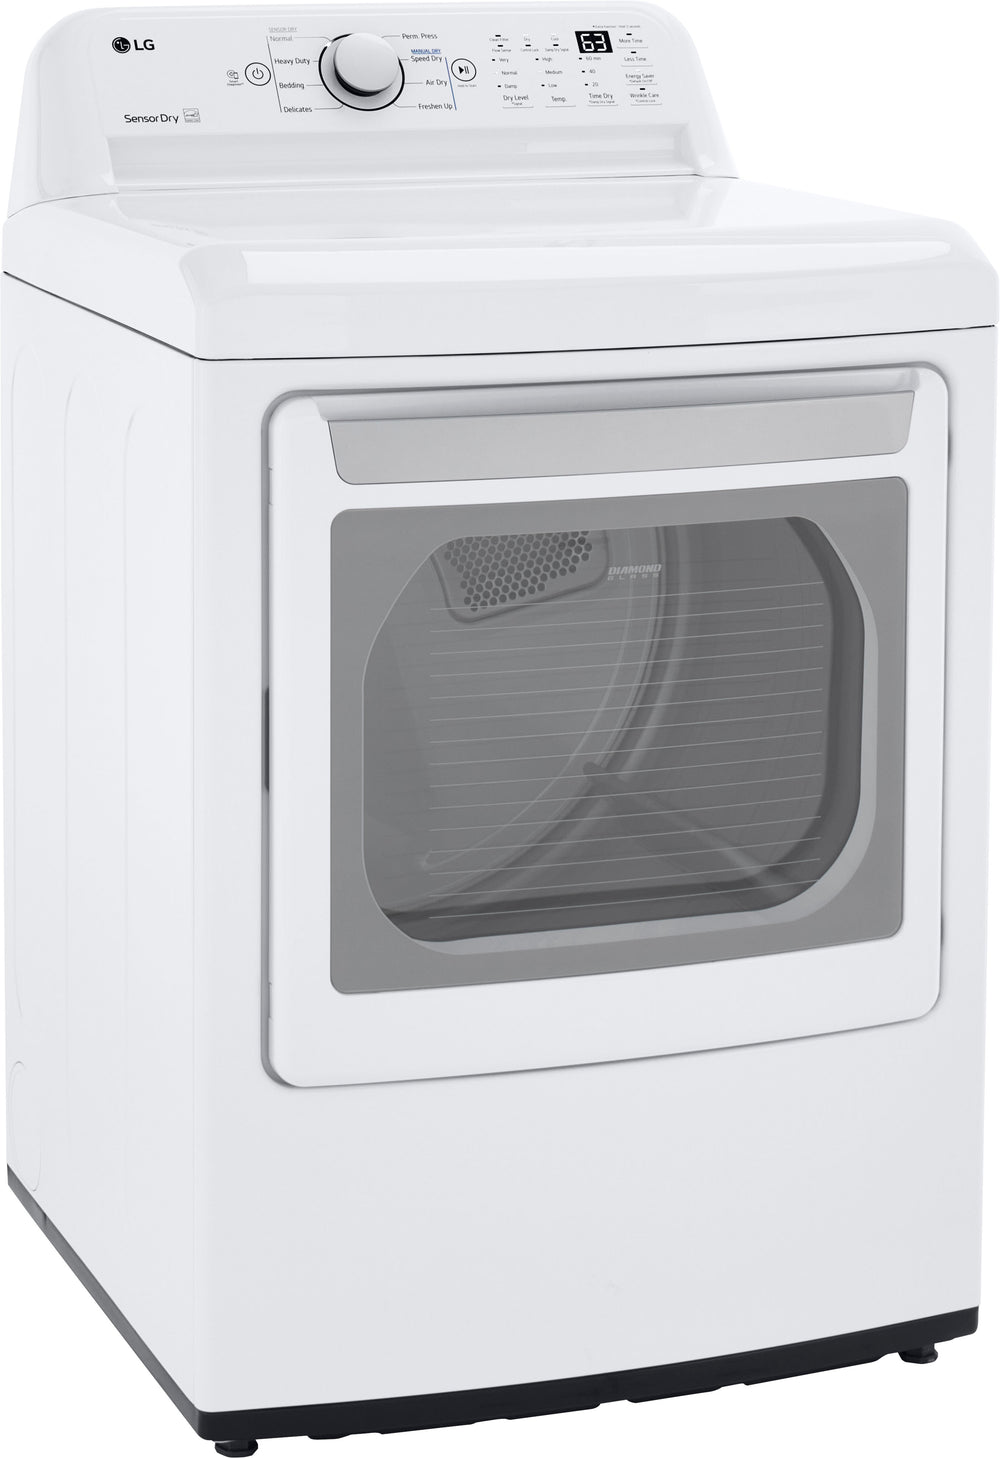 LG - 7.3 Cu Ft Gas Dryer with Sensor Dry - White_1